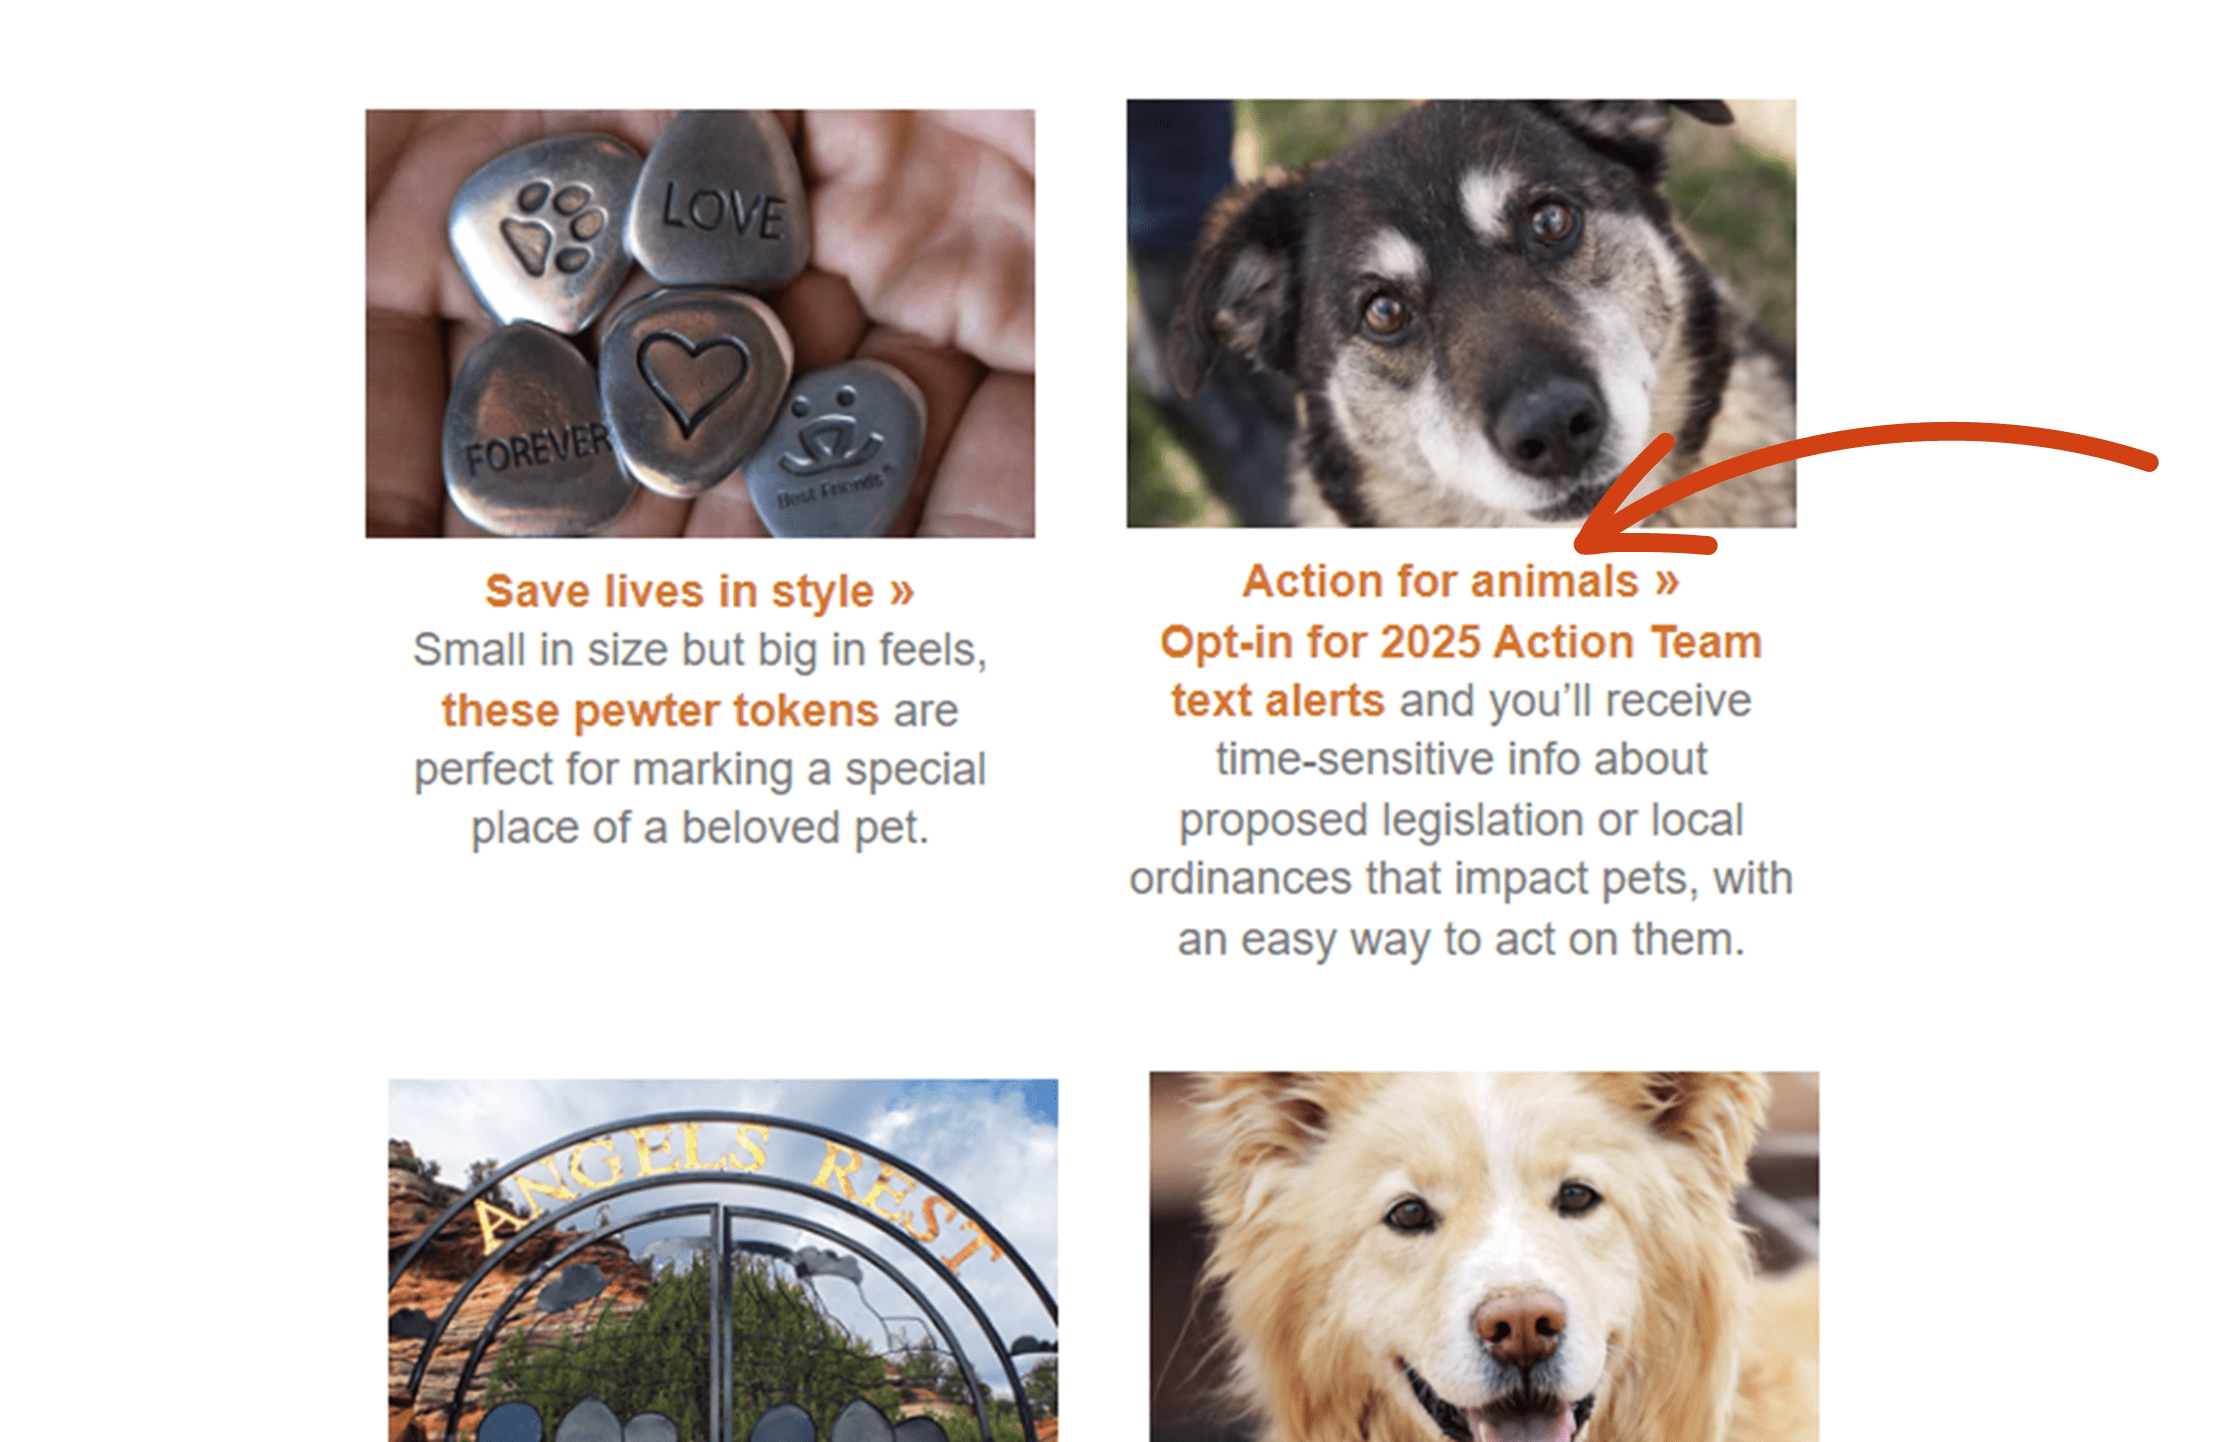 Example from a Best Friends Animal Society newsletter